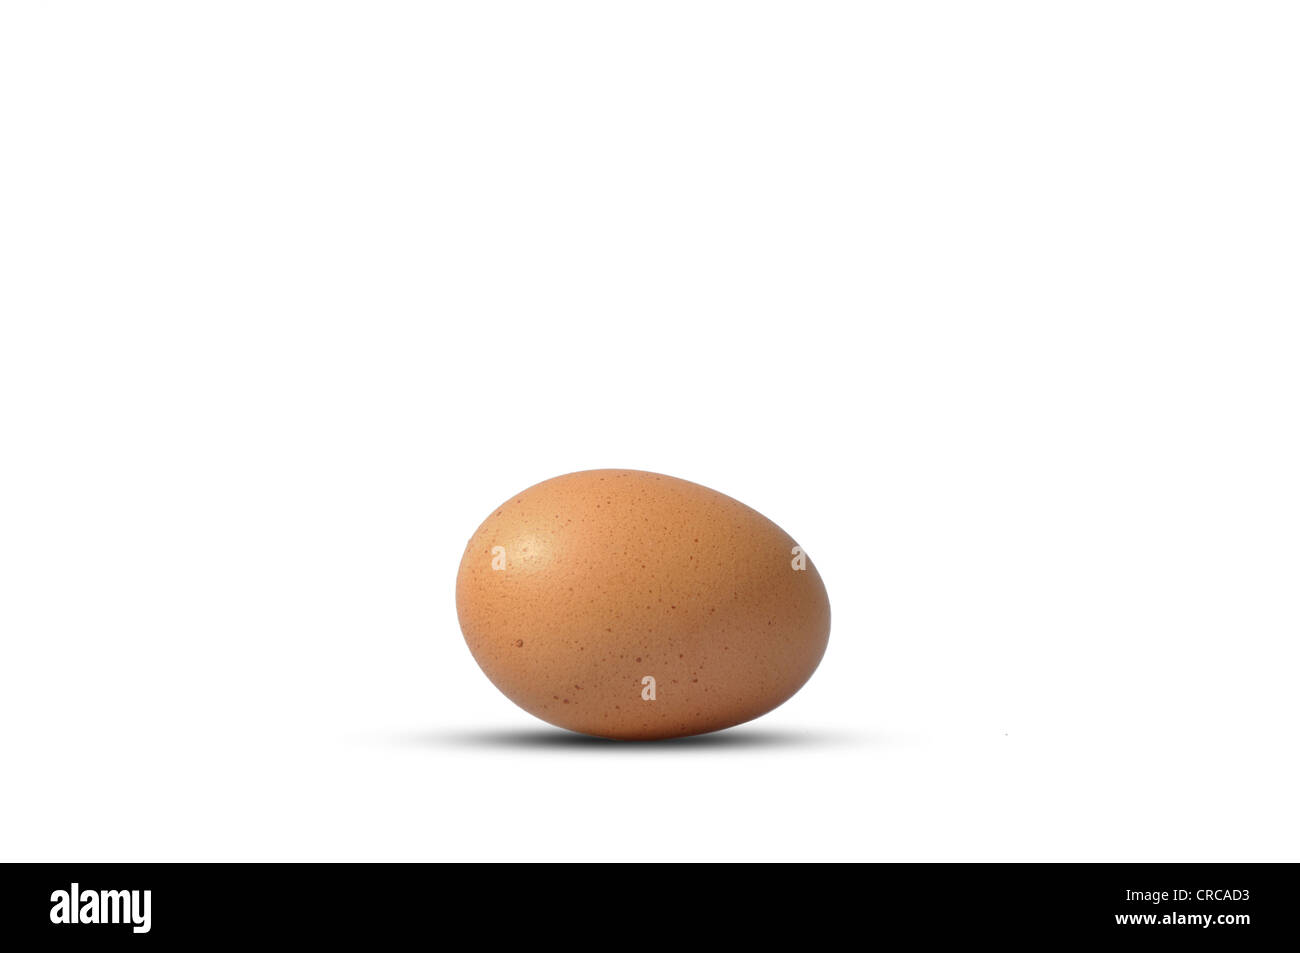 A single egg laying on its side on a white background Stock Photo - Alamy